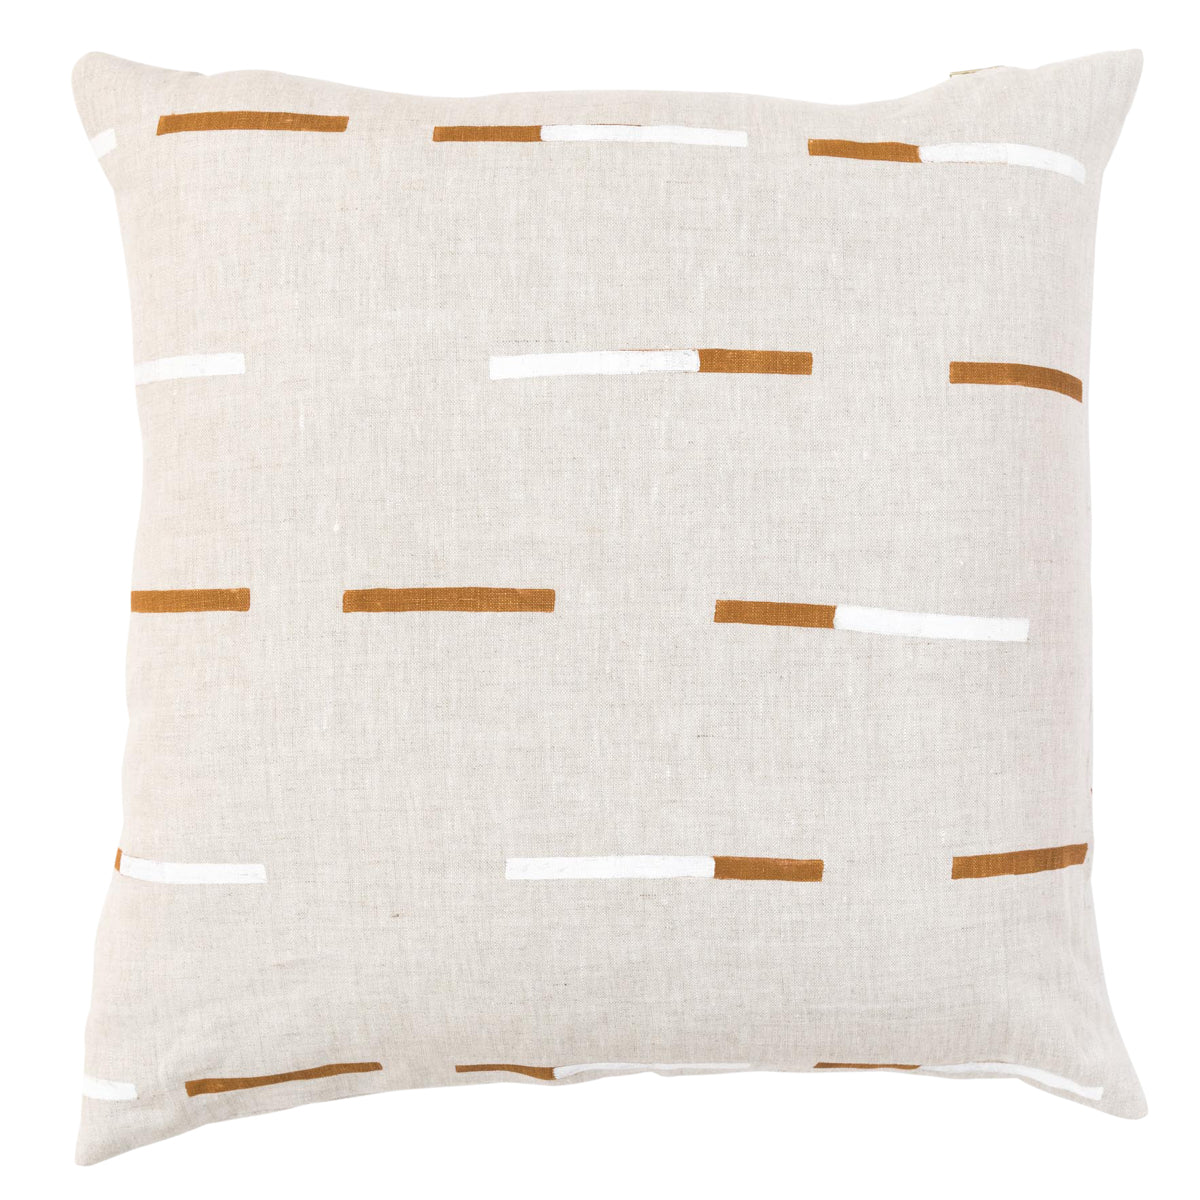 Purchase So7403006 | Overlapping Dashes Pillow, Brown & White - Schumacher Pillows